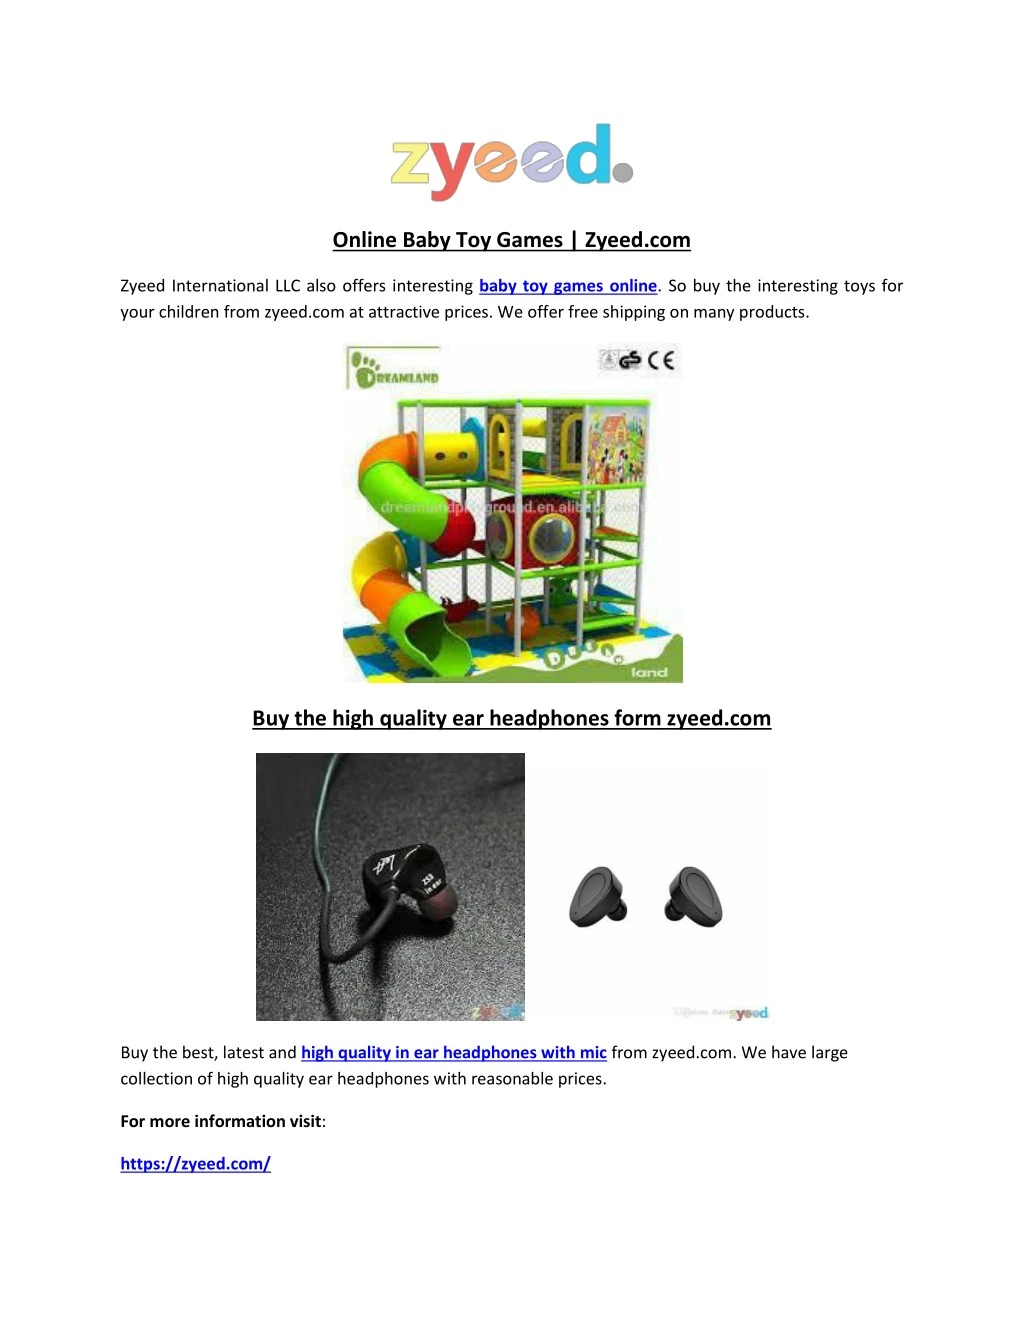 online baby toy games zyeed com